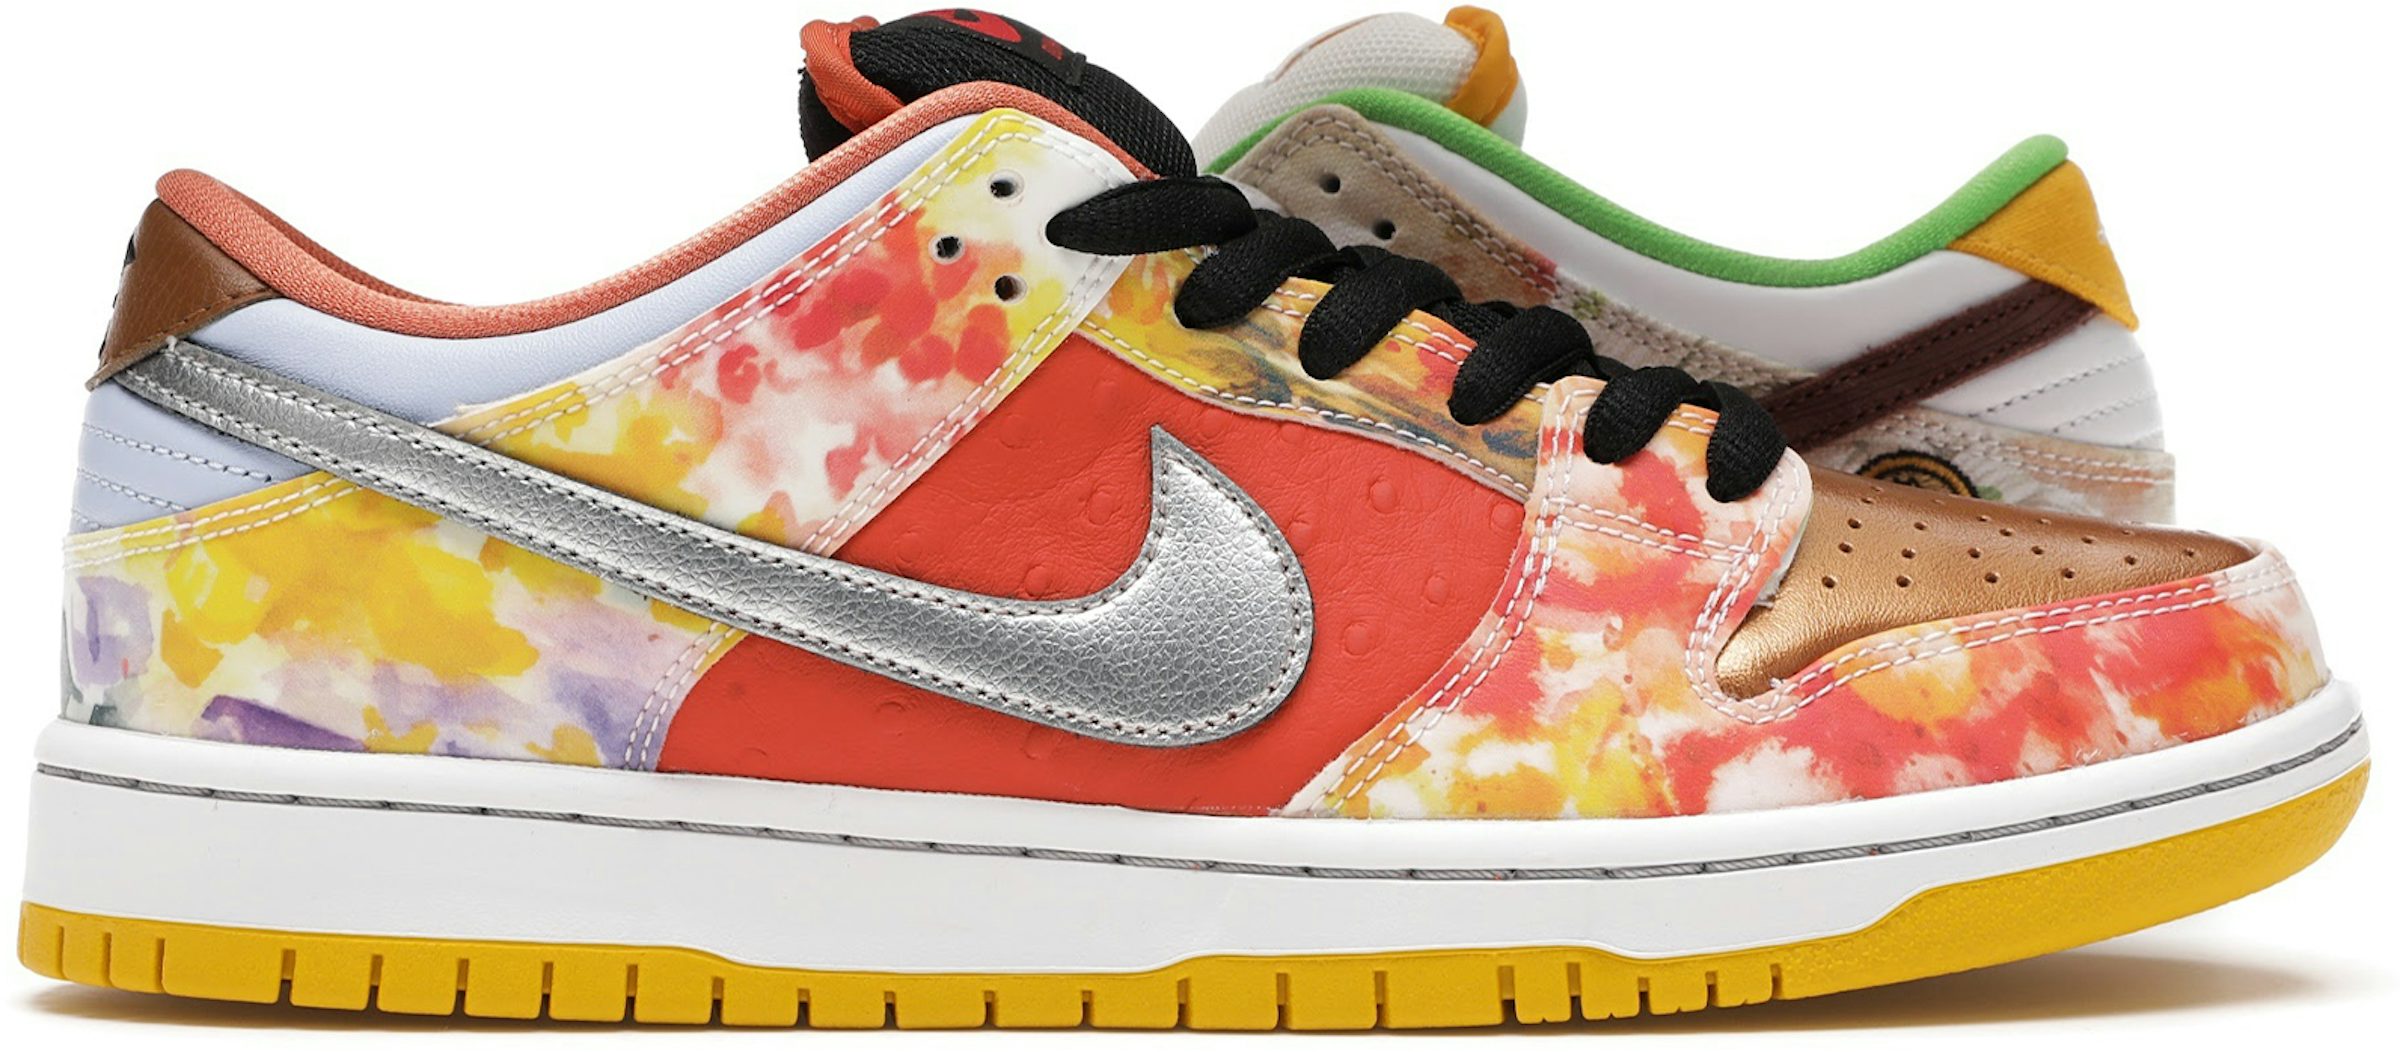 Off White Nike Dunk Low for Chinese New Year : r/Sneakers